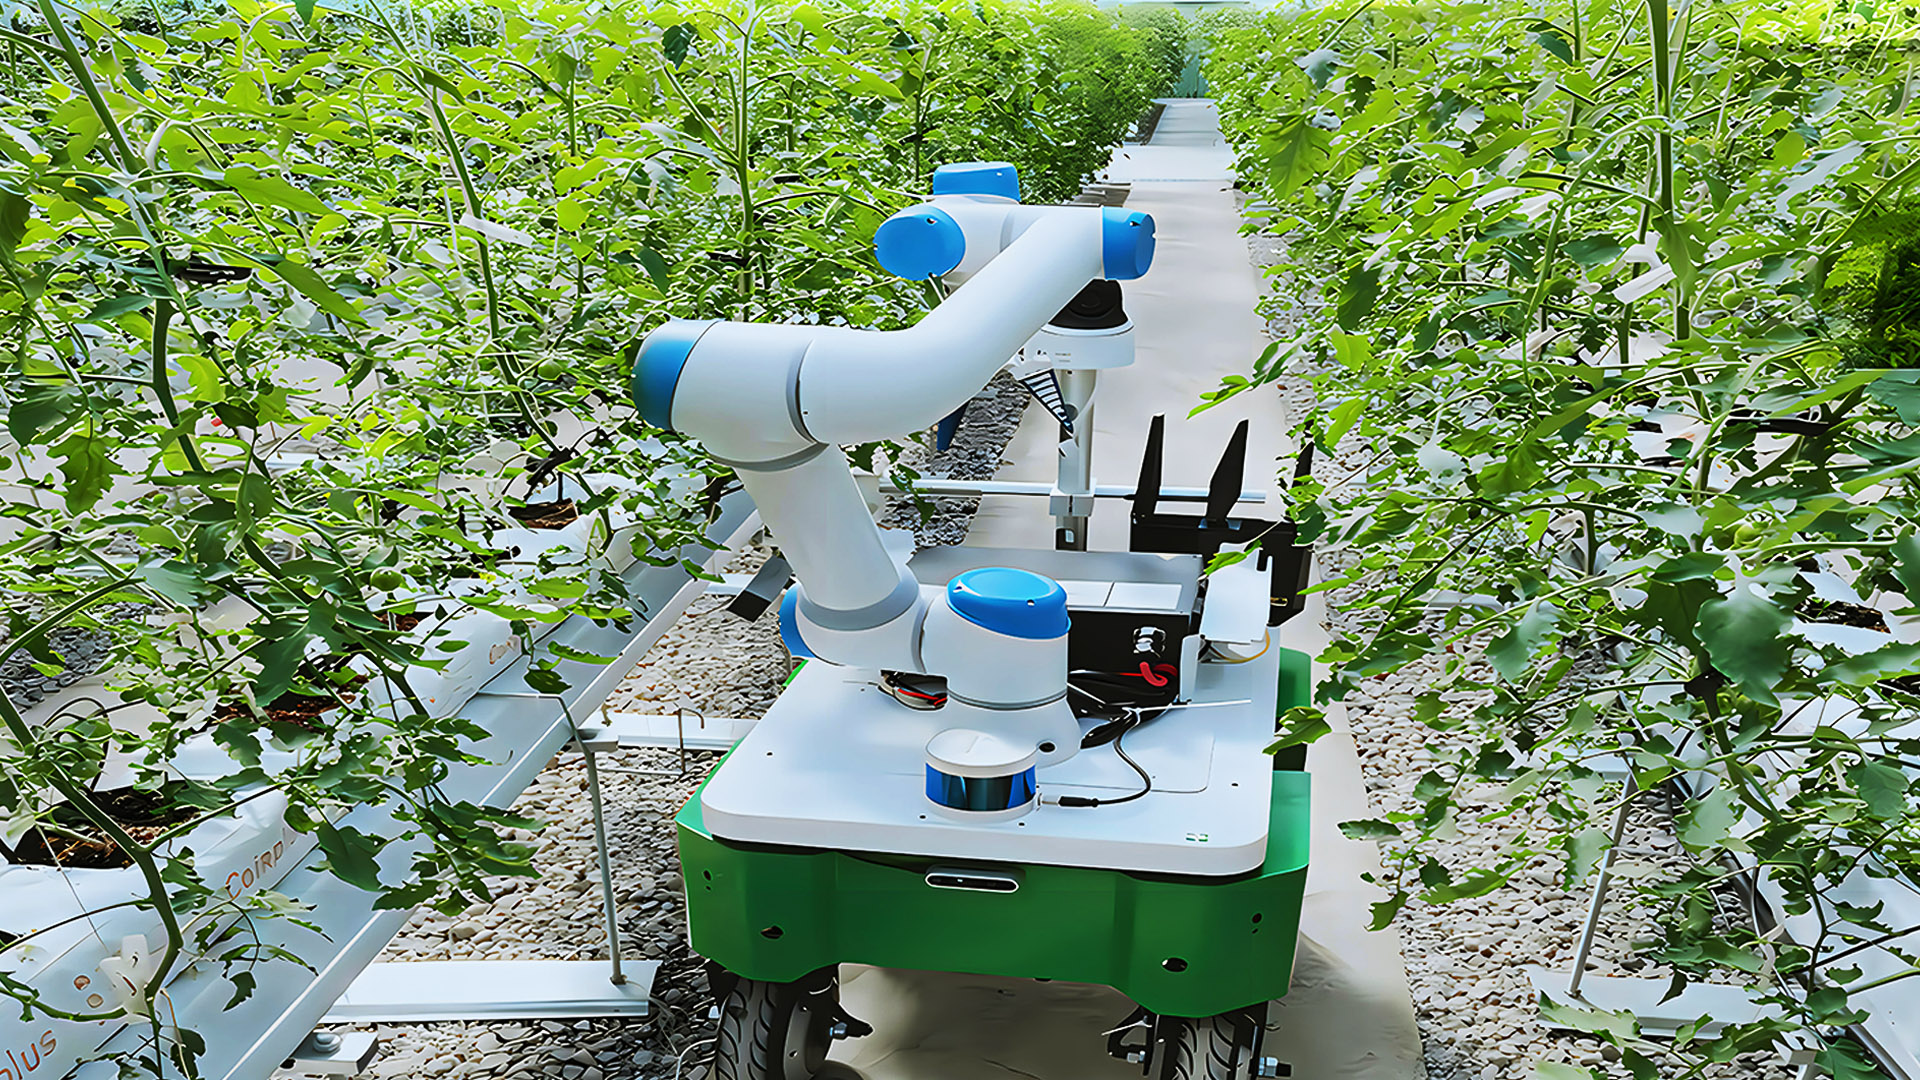 Introduction to Intelligent Agricultural Picking Robots